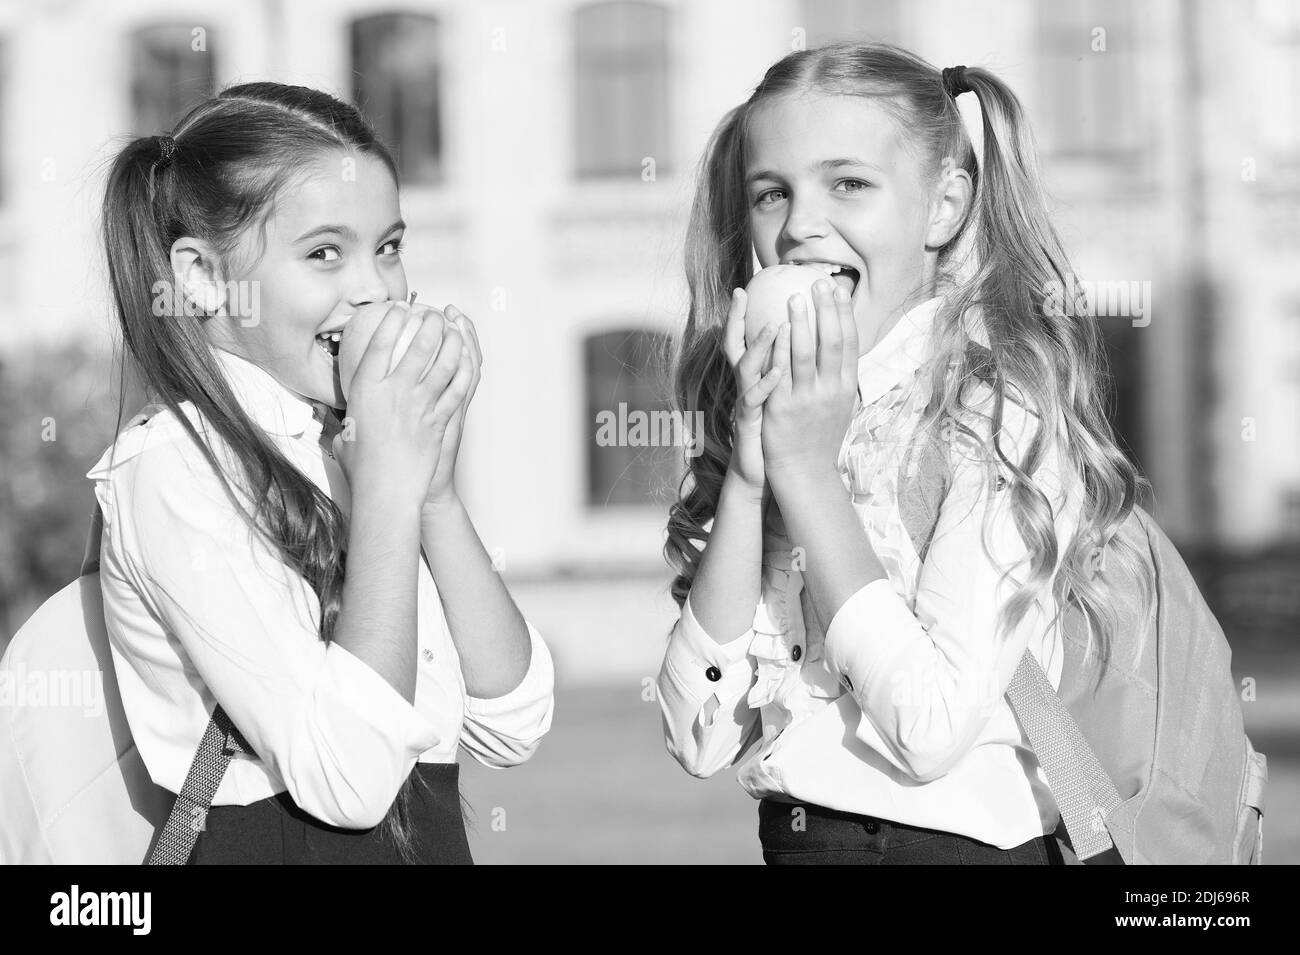 Girls small kids eating apples, school lunch concept. Stock Photo